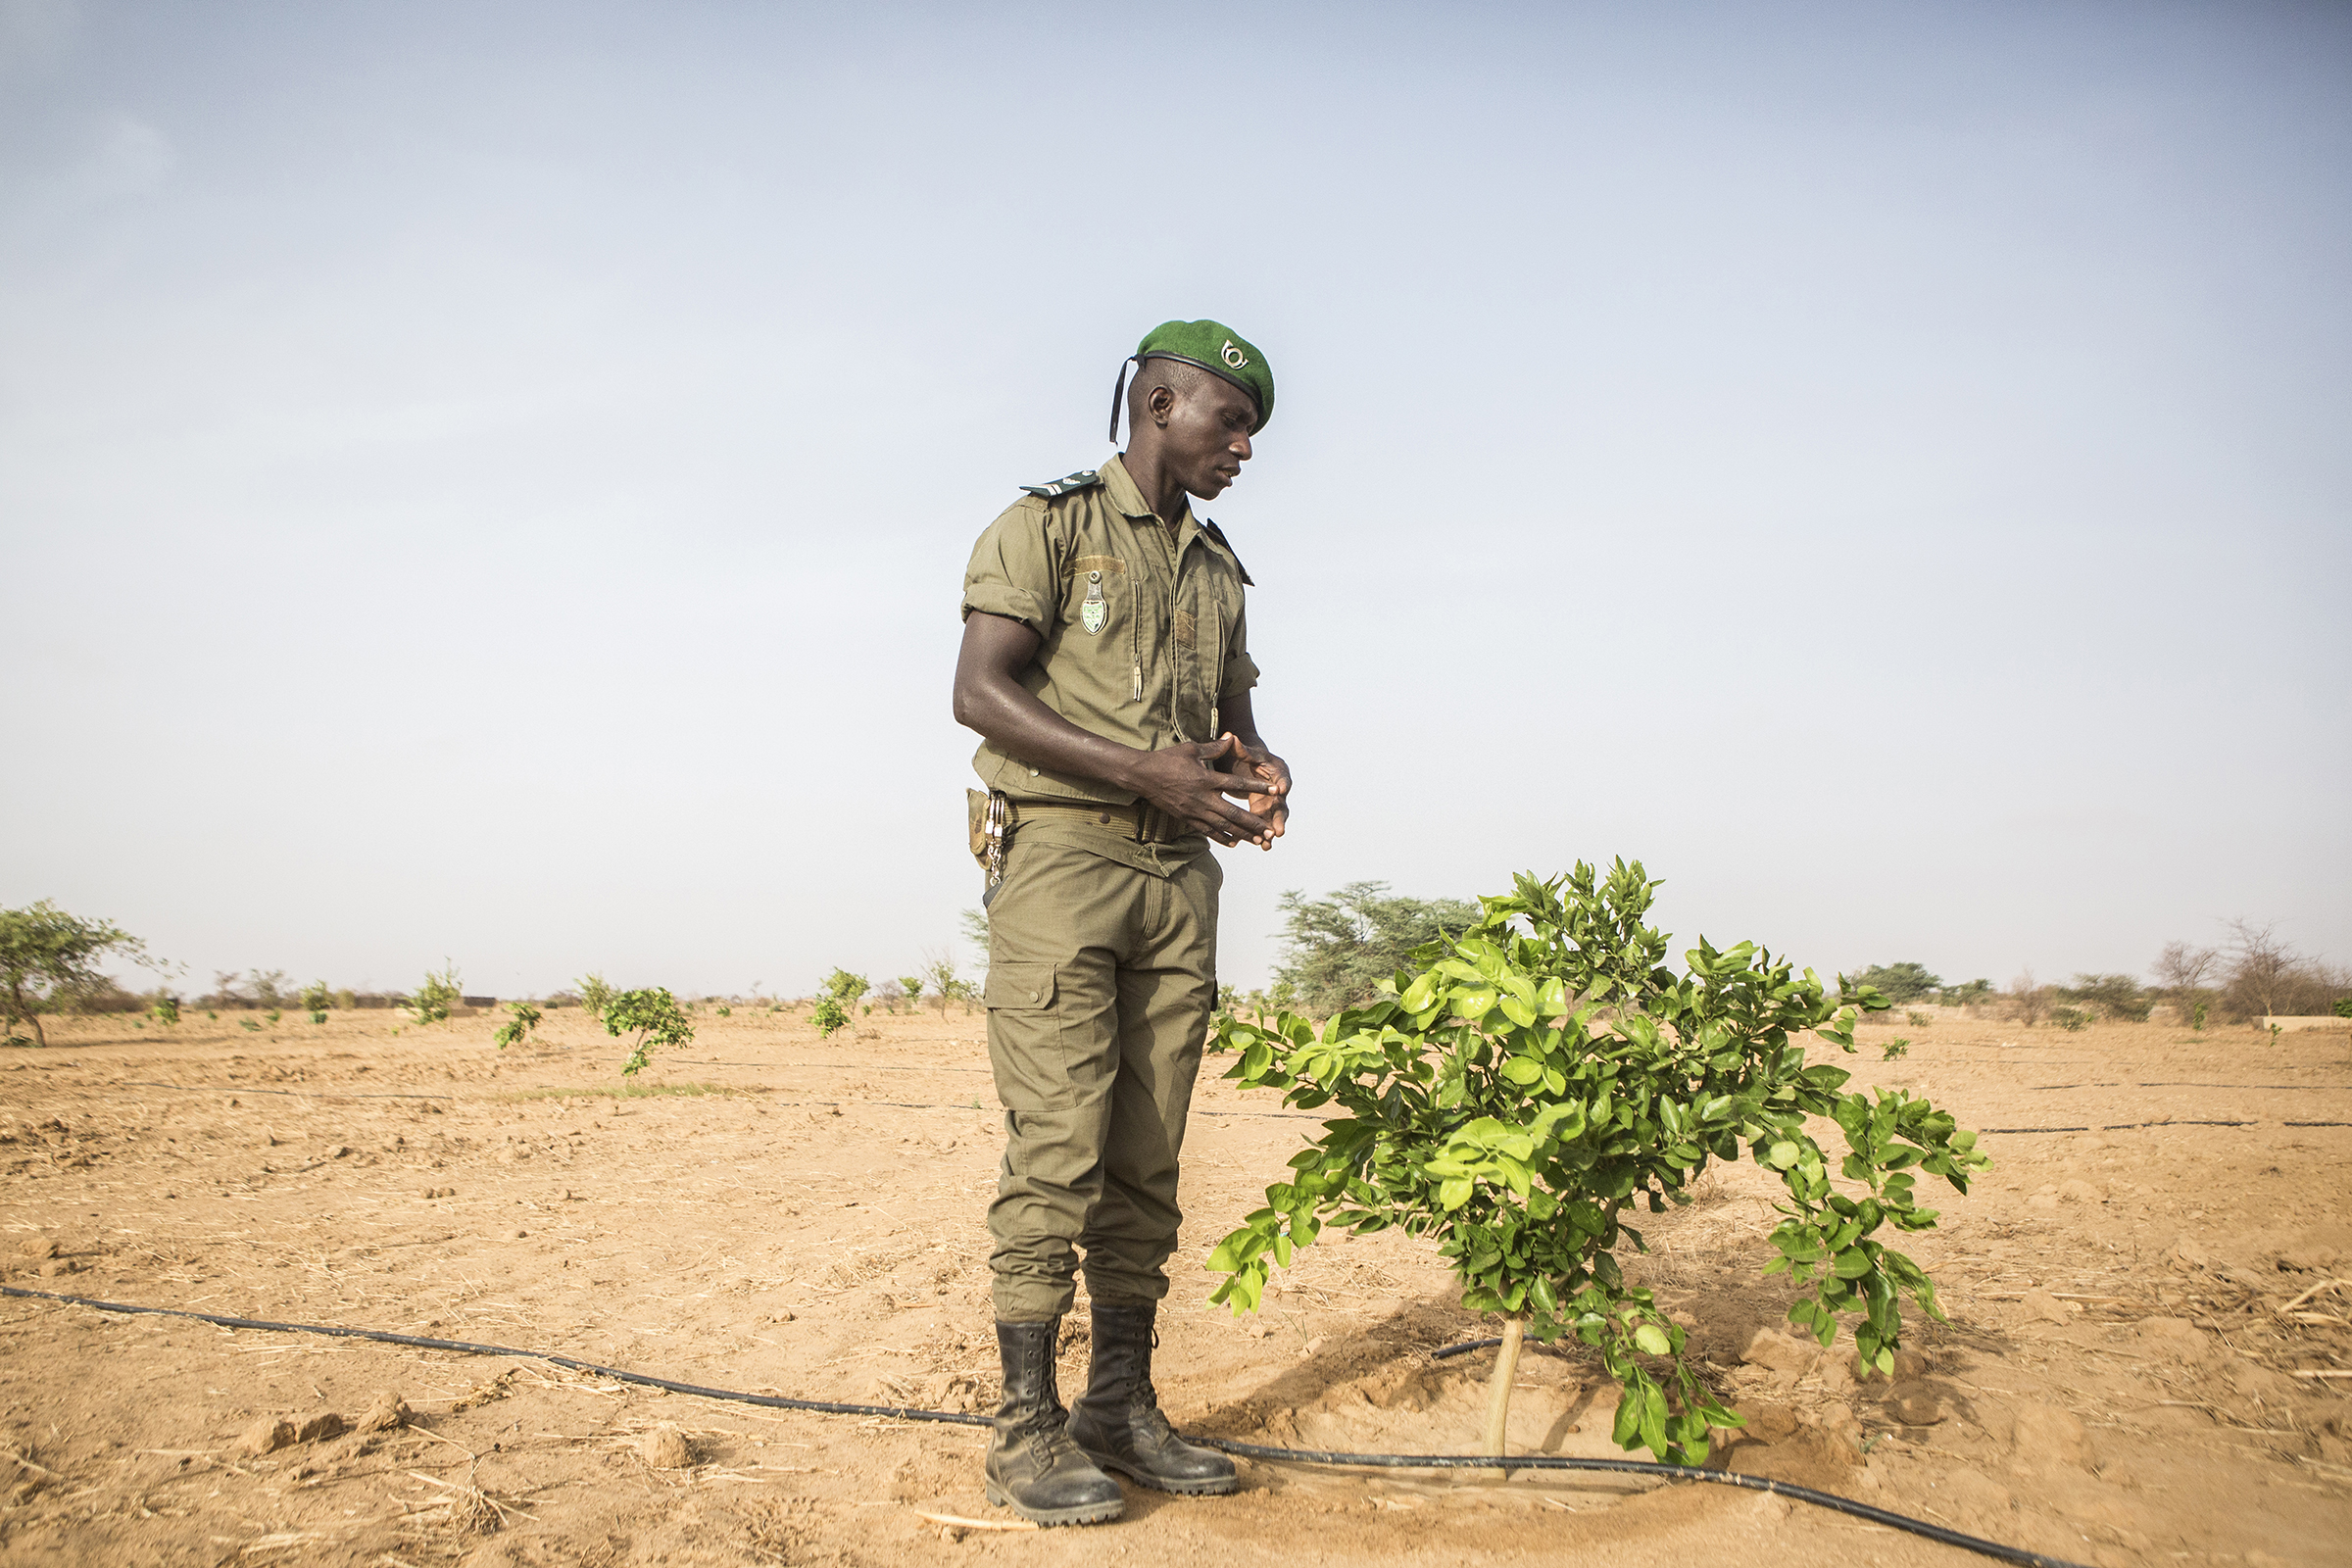 El Haji Gouebiaby, Base Chief for the Great Green Wall, stands beside a growing lemon tree in Mbar Toubab. (Jane Hahn for TIME)